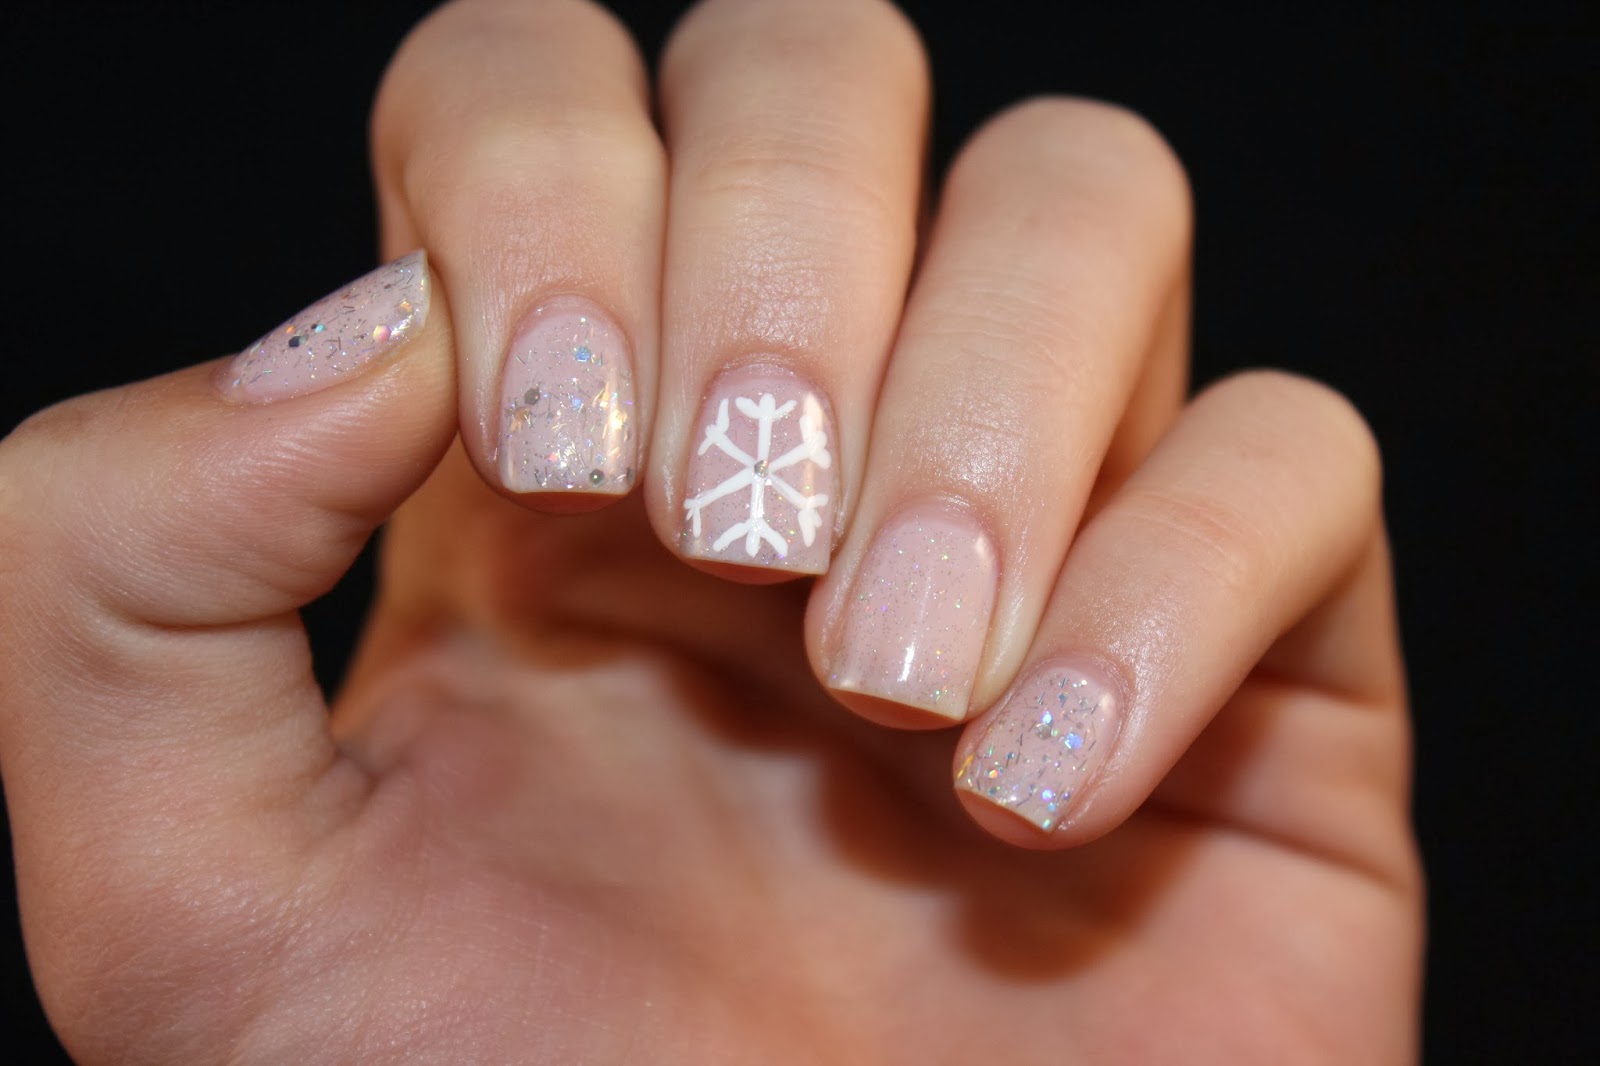 7. Snowflake Solar Nail Designs for Christmas - wide 1